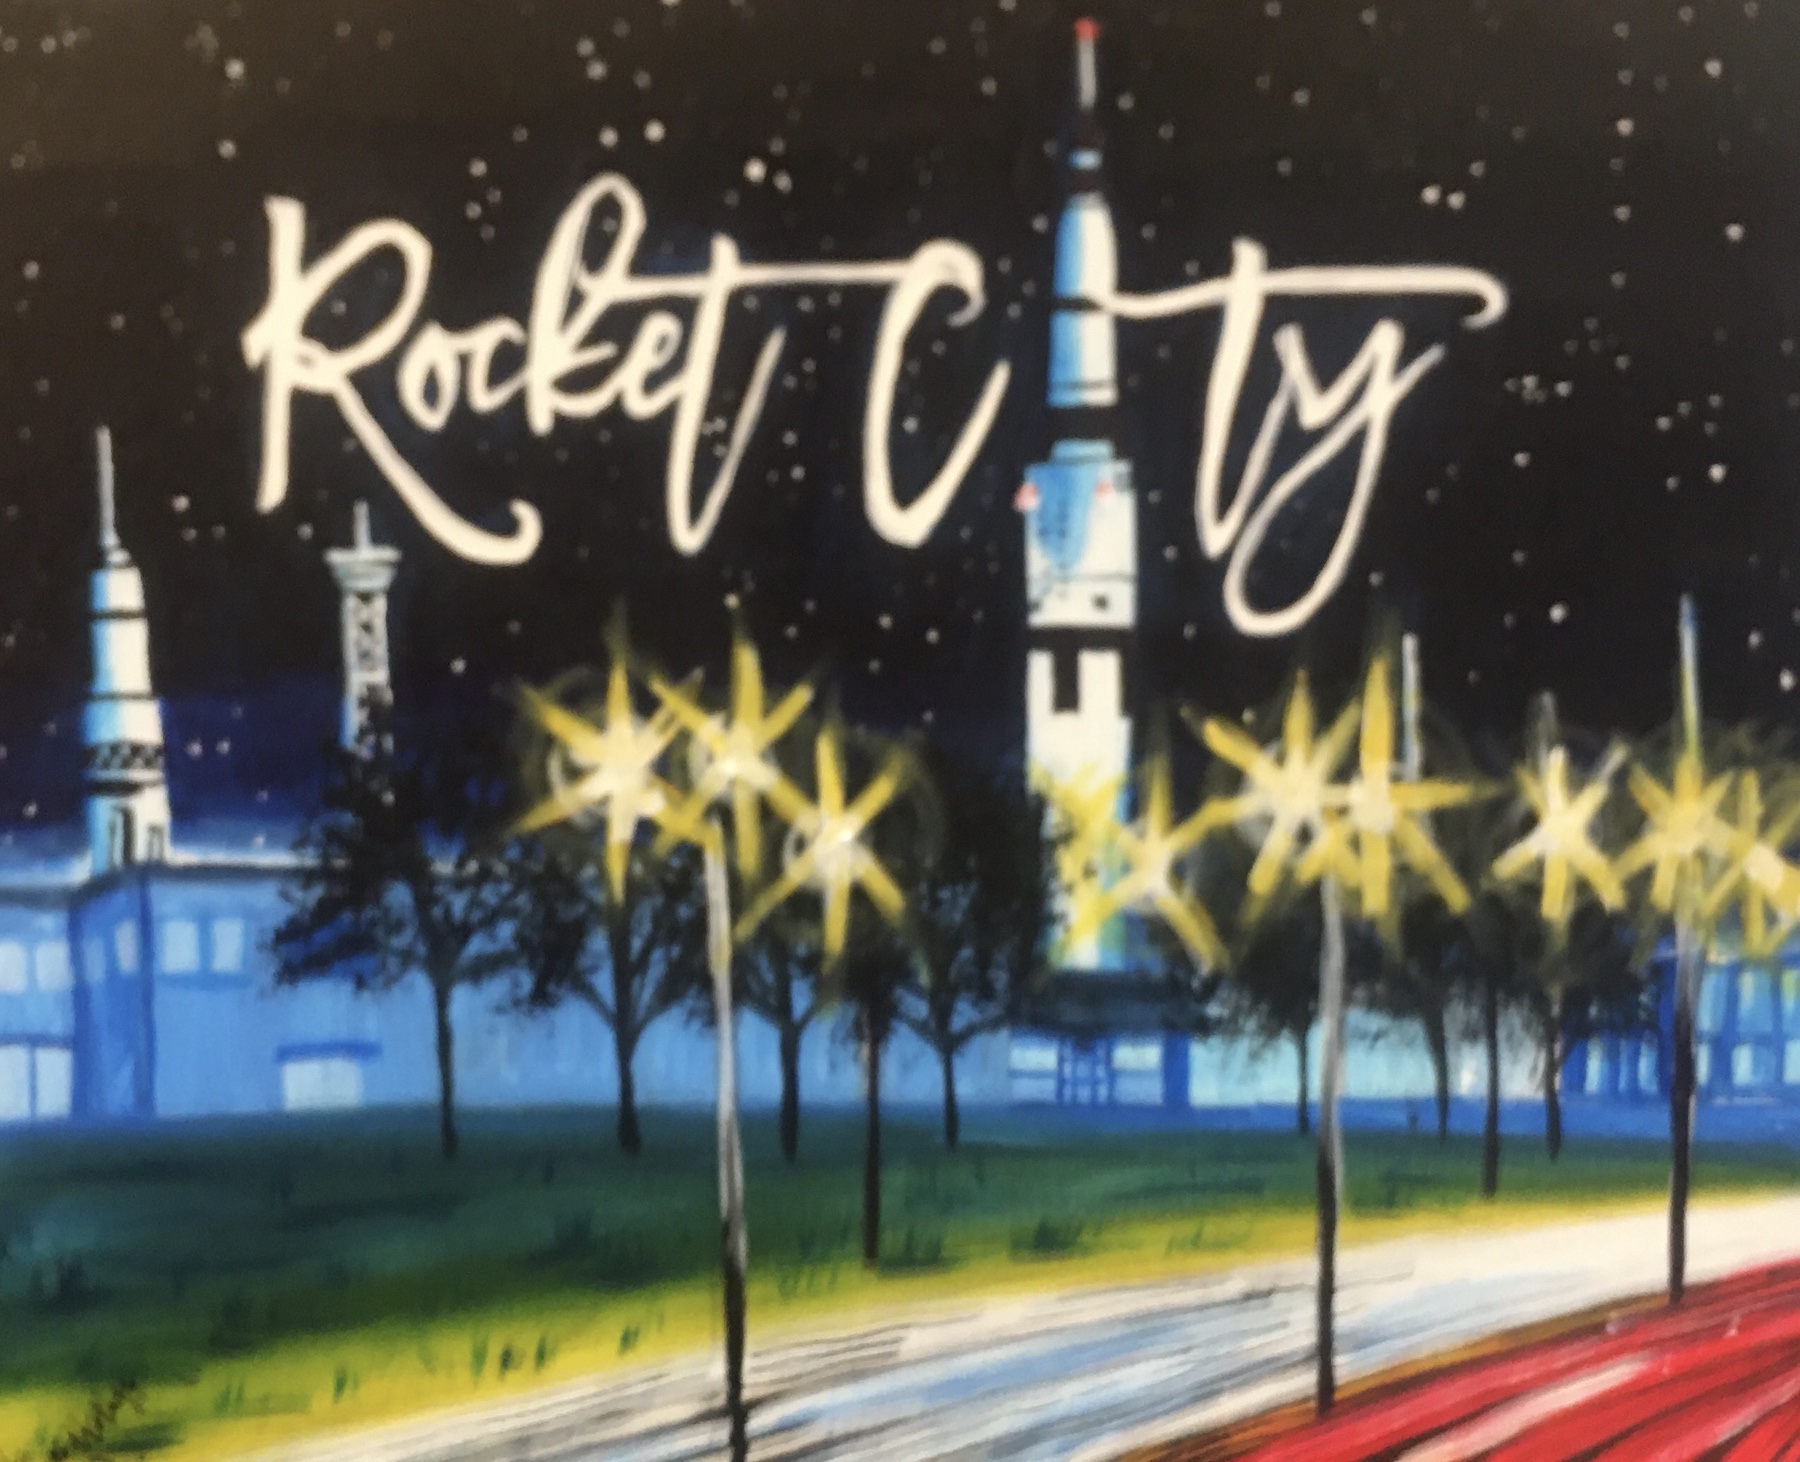 Rocket City On Wheels at Jonathan's Grille